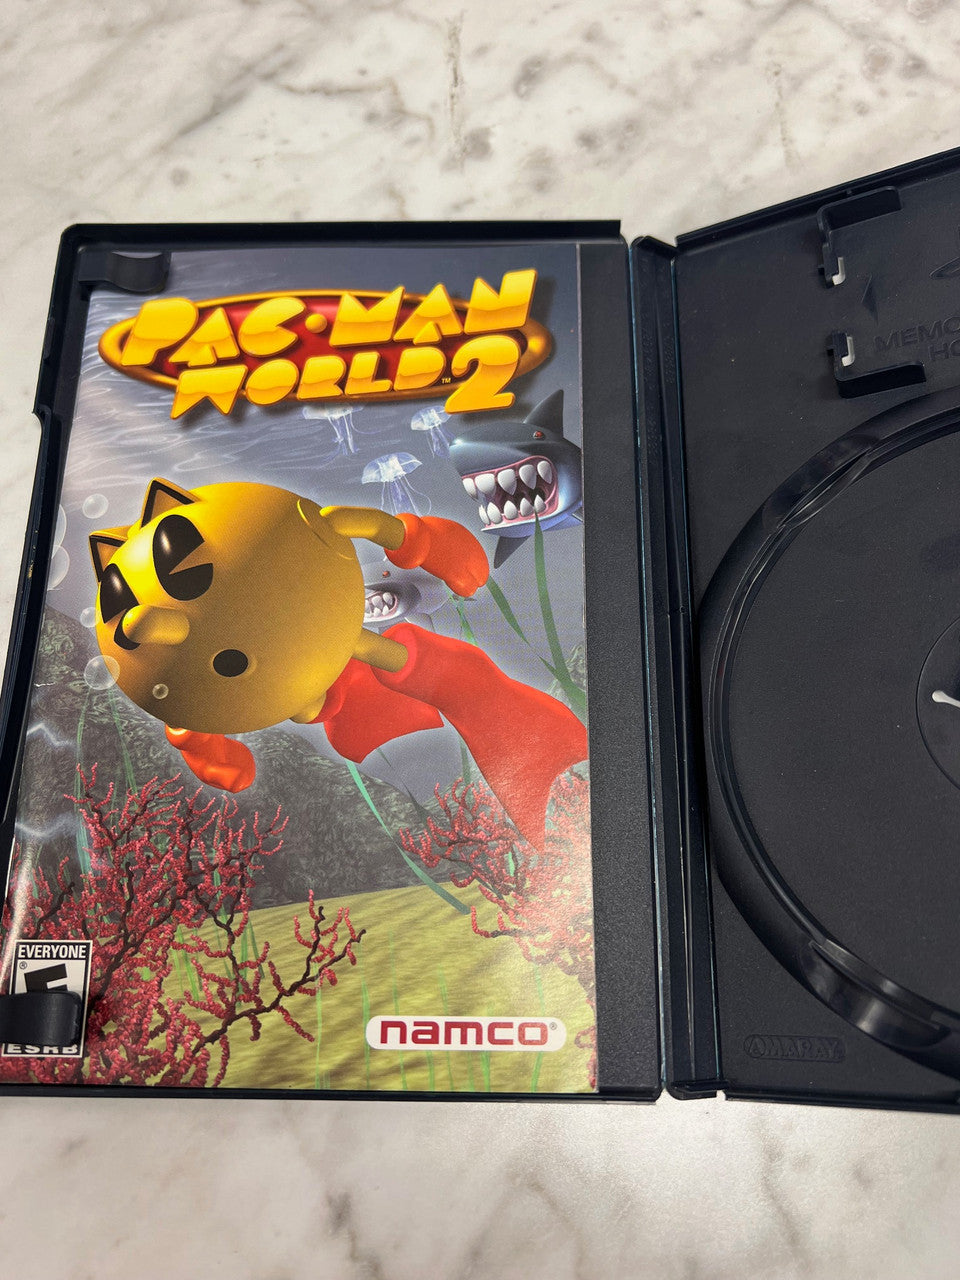 Pac-Man World 2 Playstation 2 Case and manual only